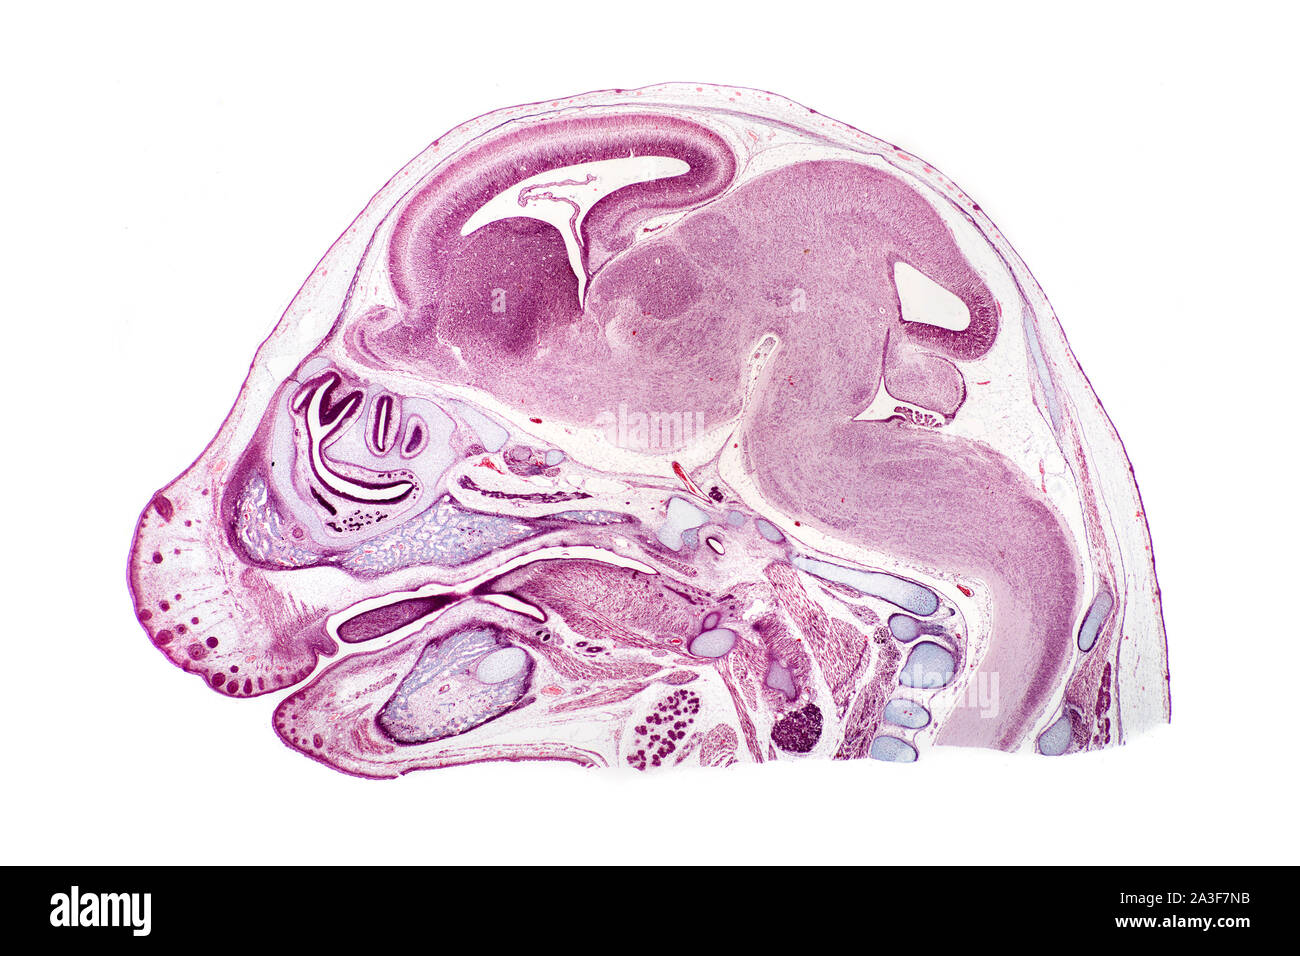 Mouse late embryo VLS head, lateral view Stock Photo